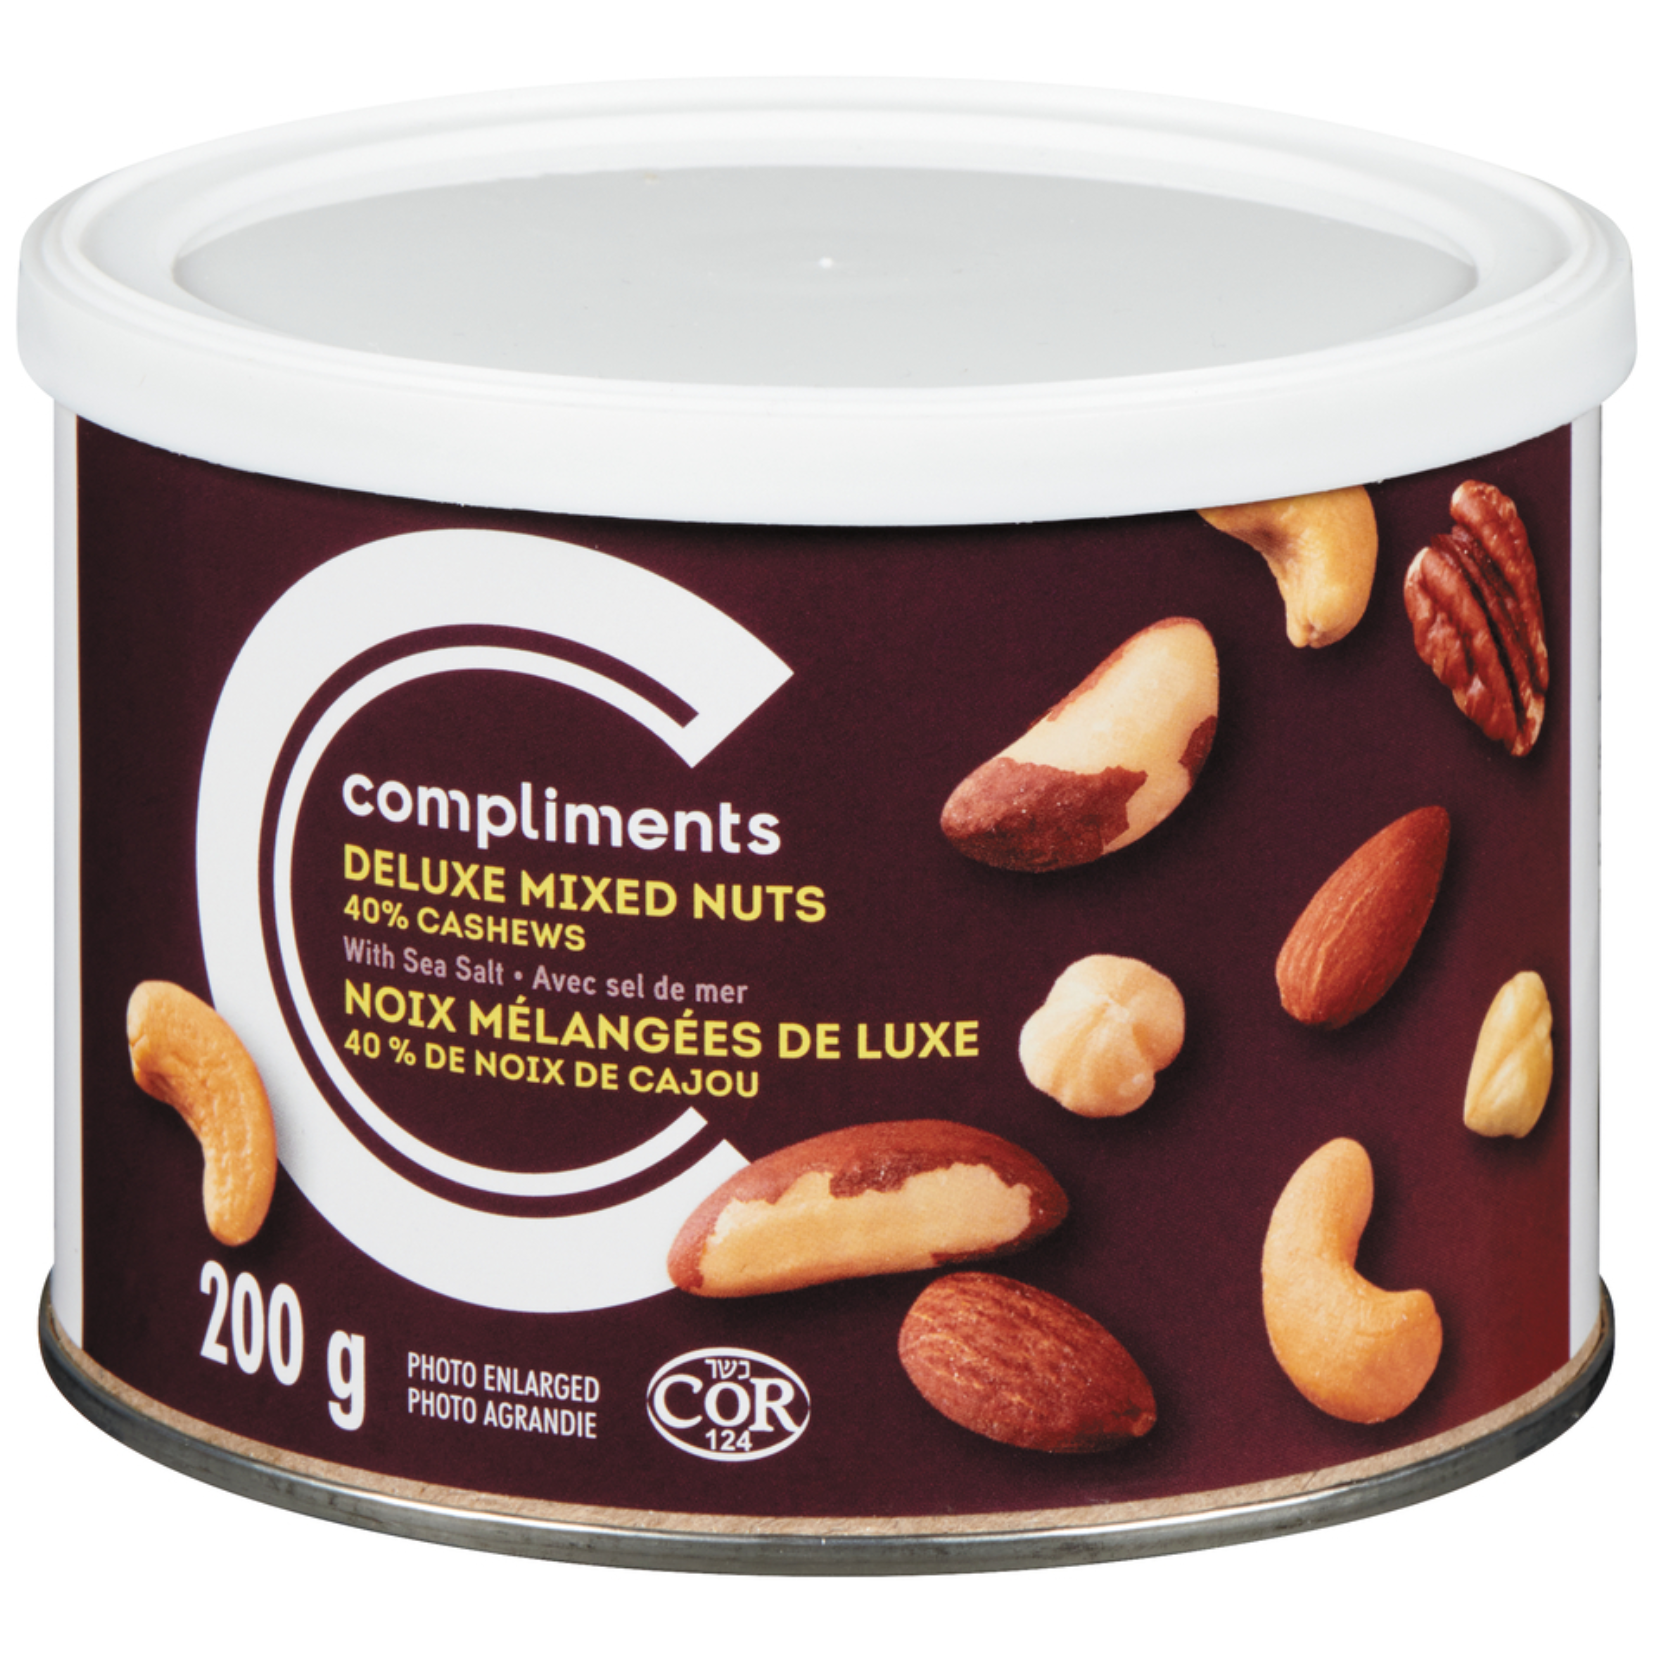 Compliments Deluxe 40% Roasted Cashews Mixed Nuts 200g